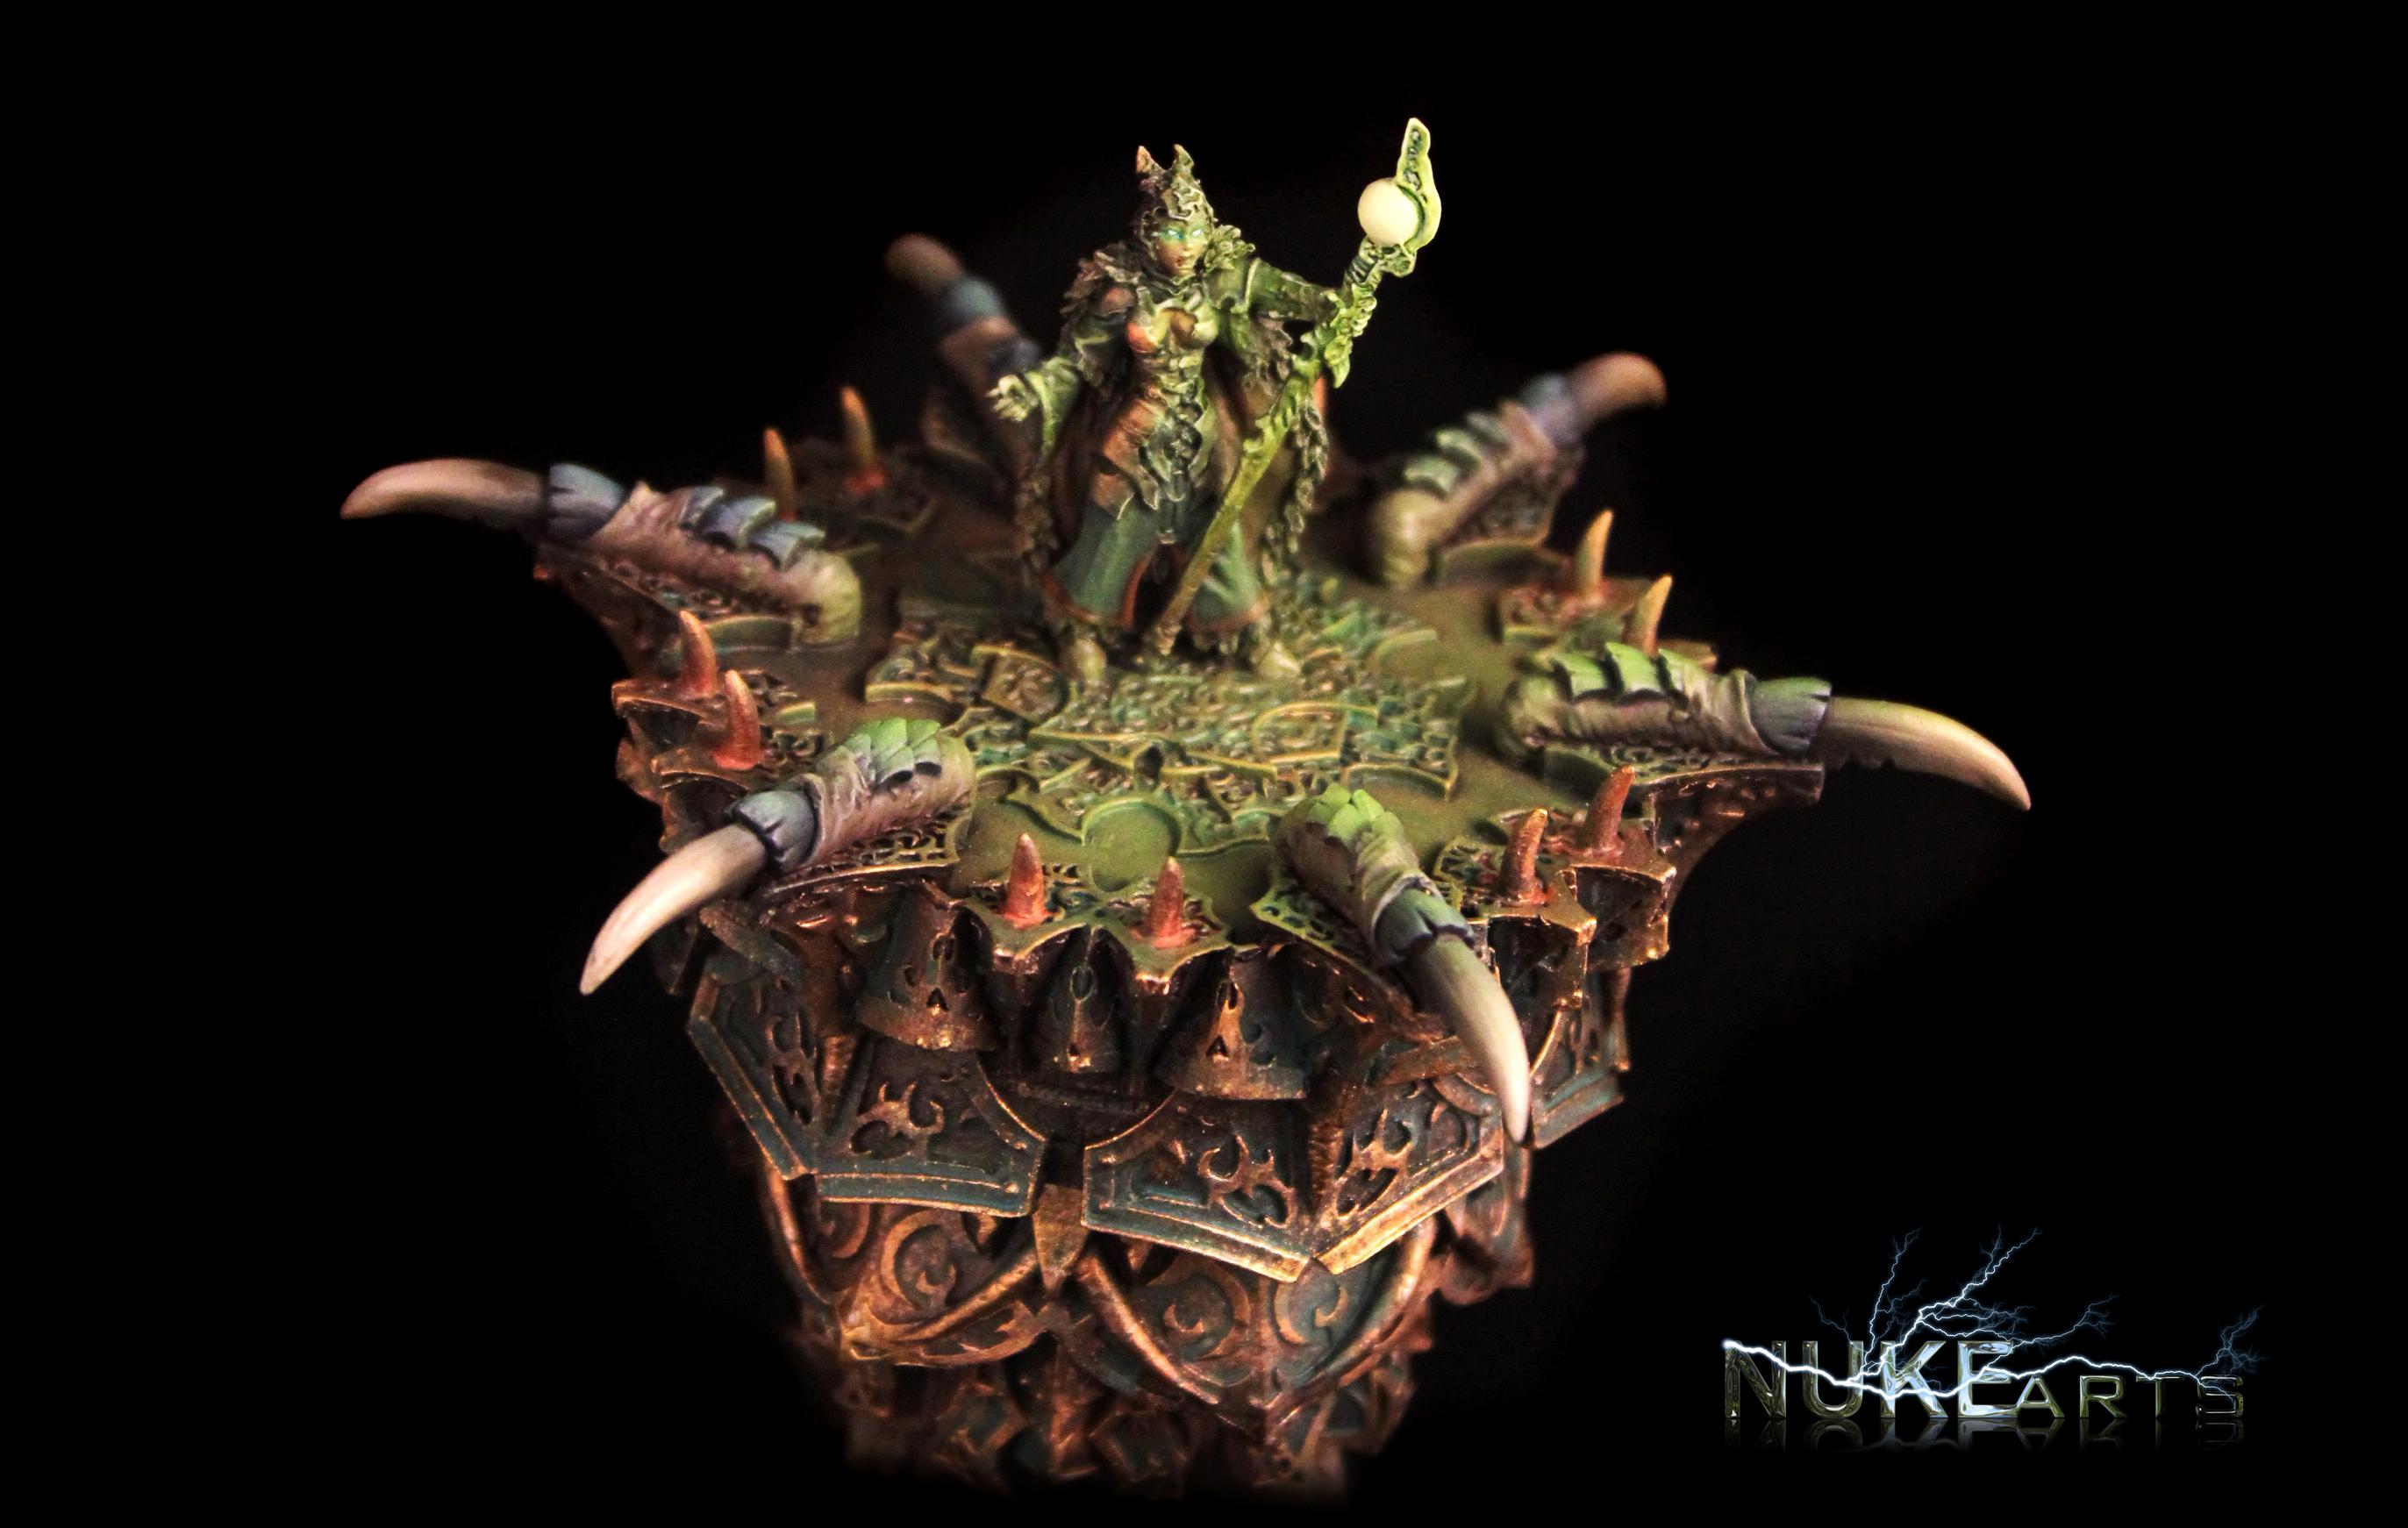 Hordes, Nuclealosaur, Nuke Arts, Painting, Privateer Press, Throne Of Everblight, Warmachine